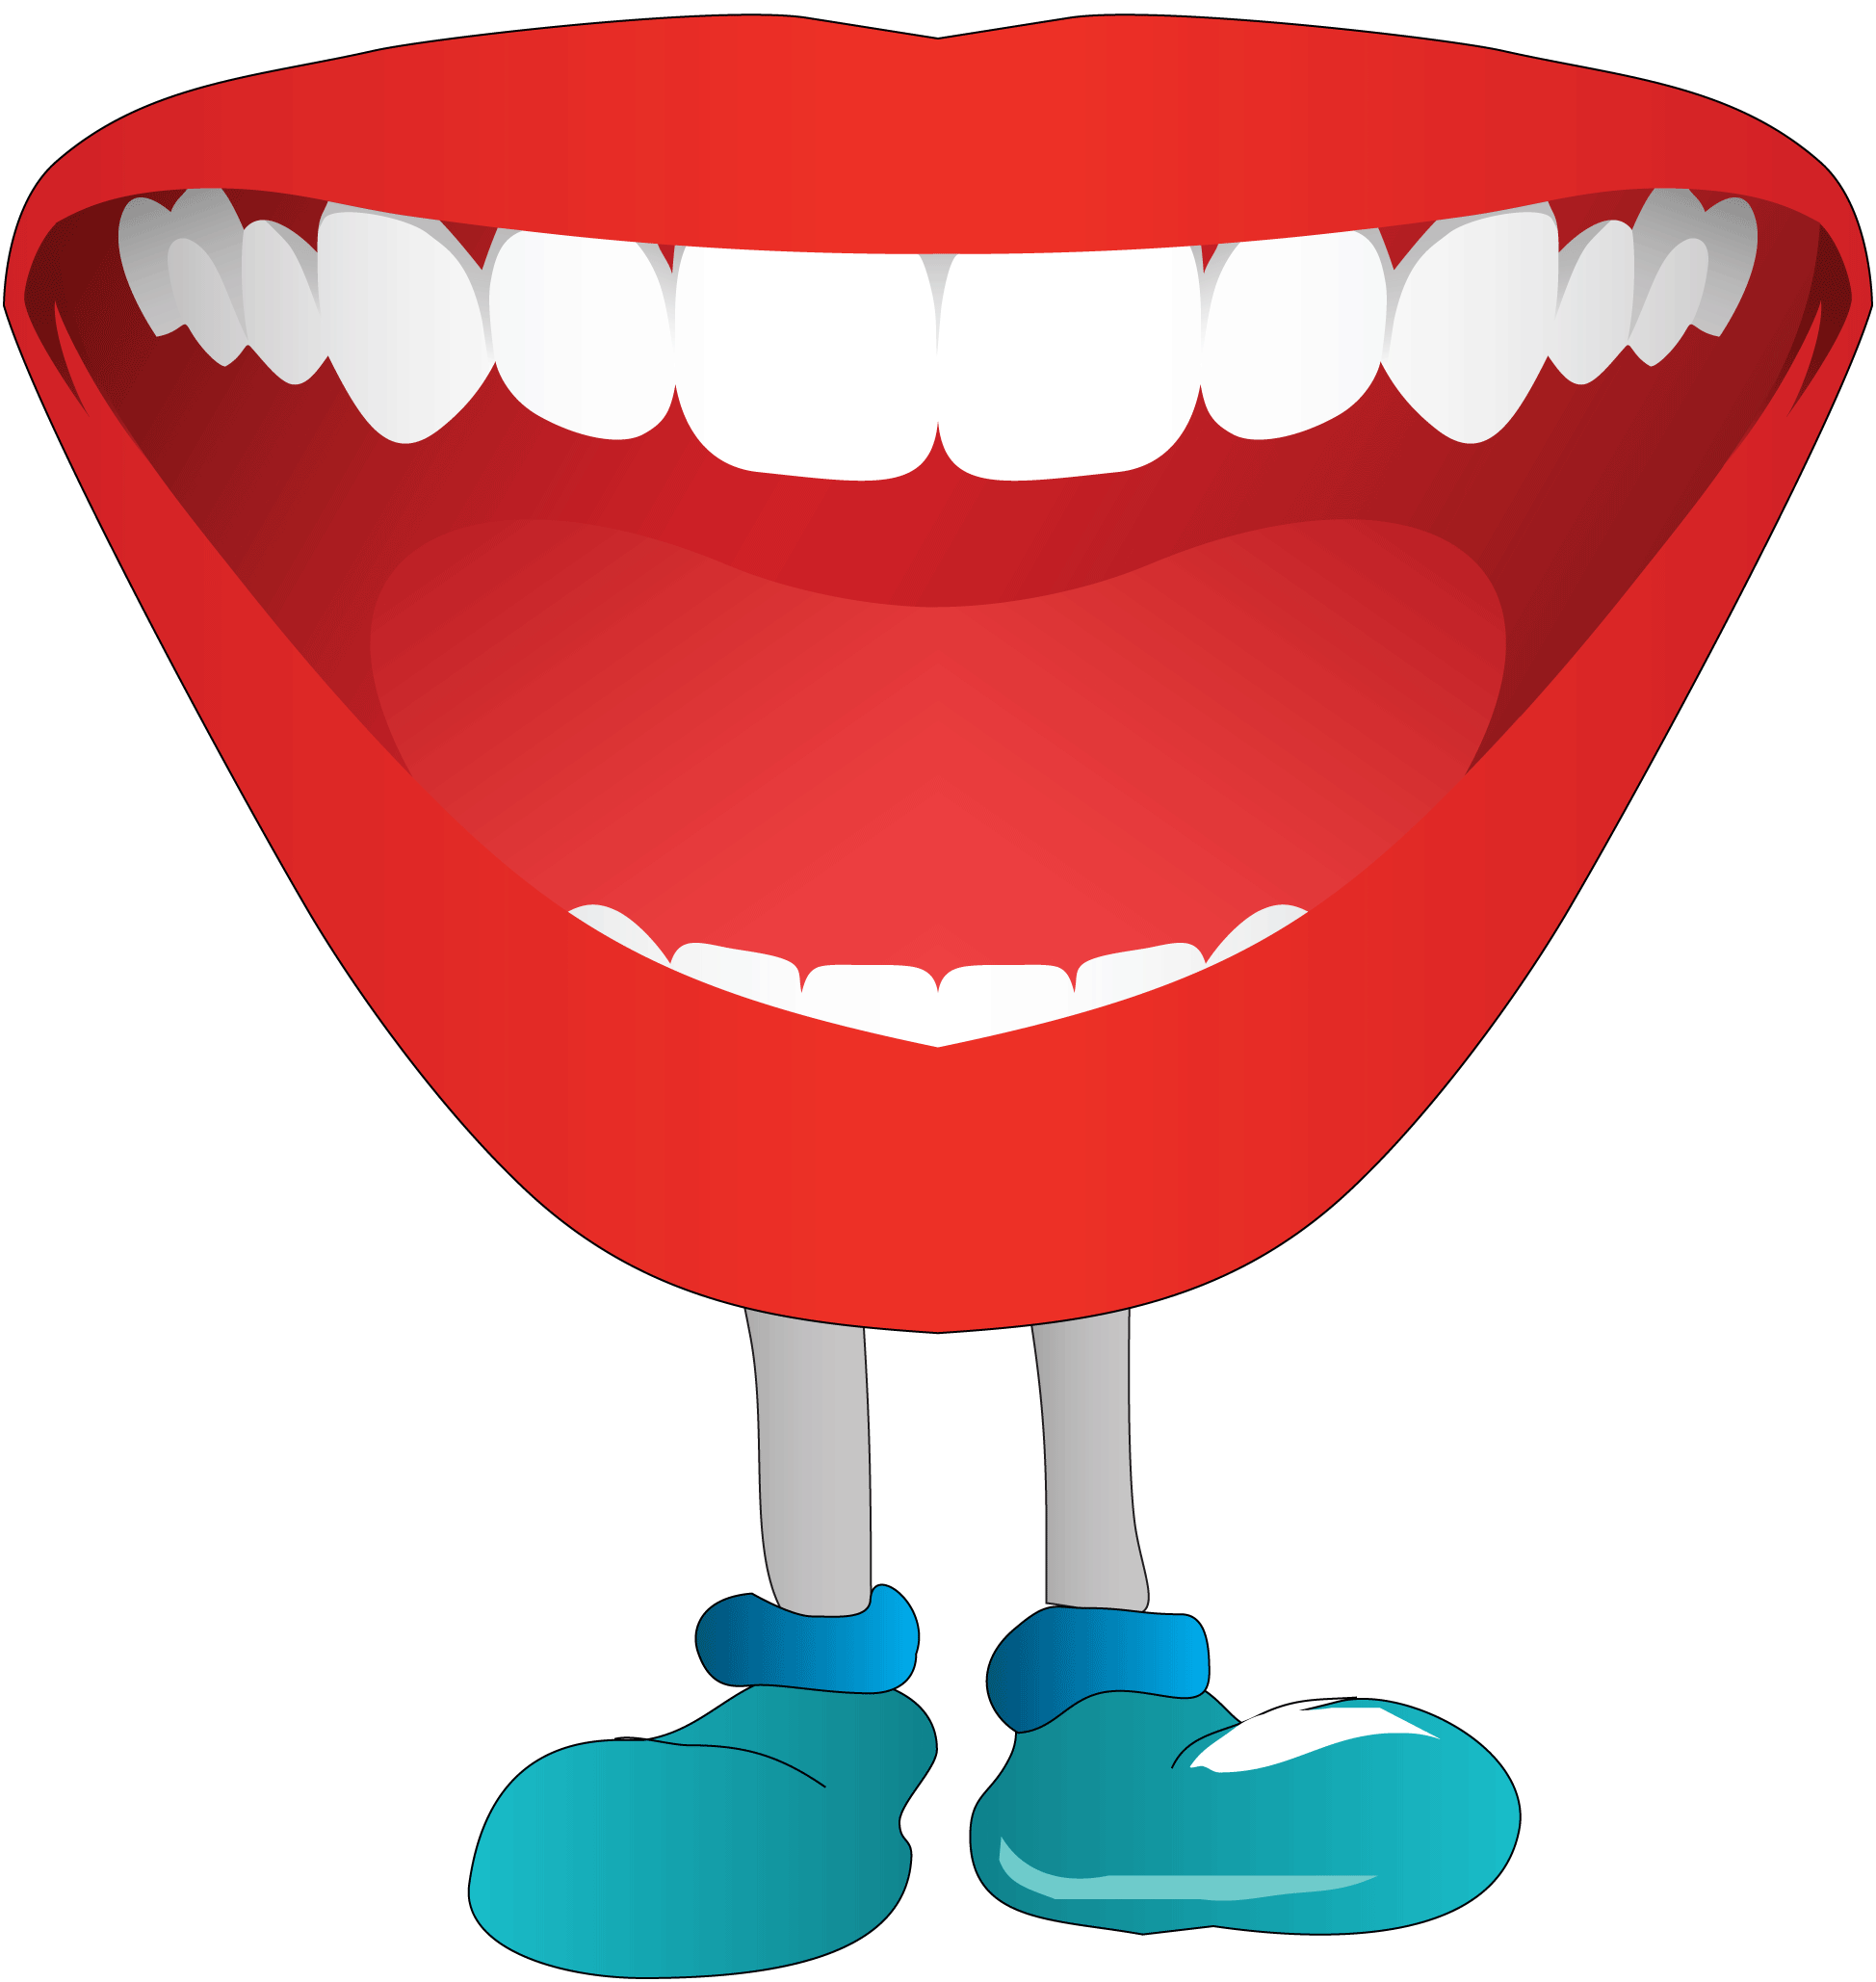 Clip Arts Related To : shark with mouth open cartoon. view all Mouth Open C...